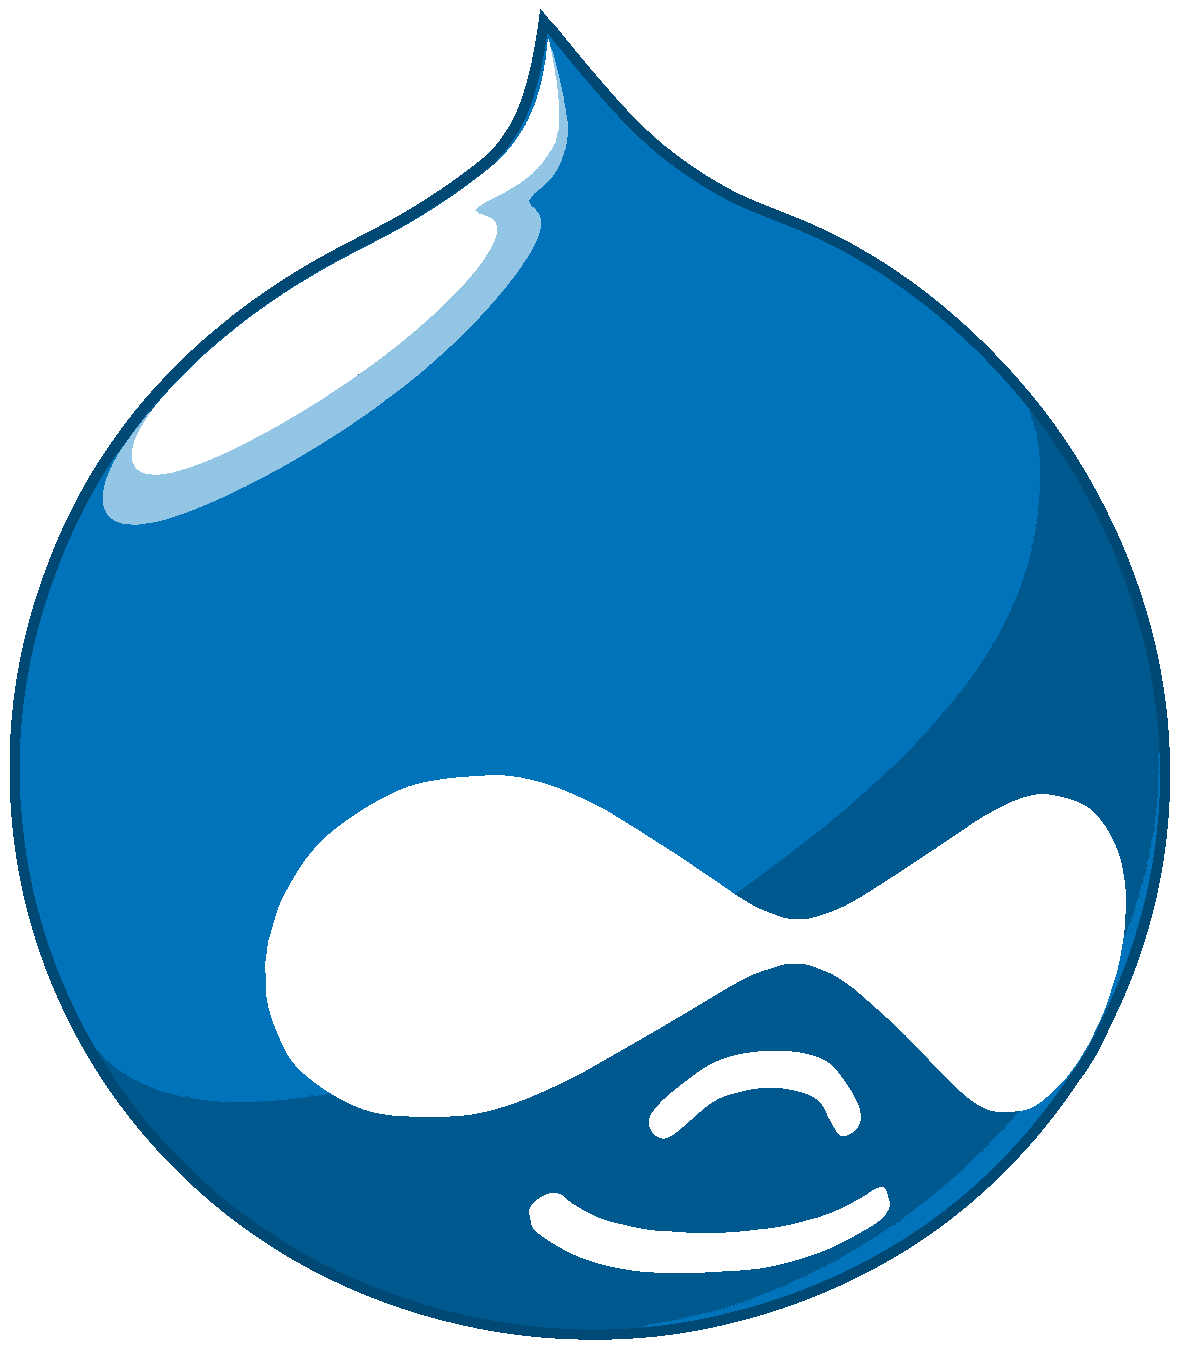 Need your Drupal website updated?